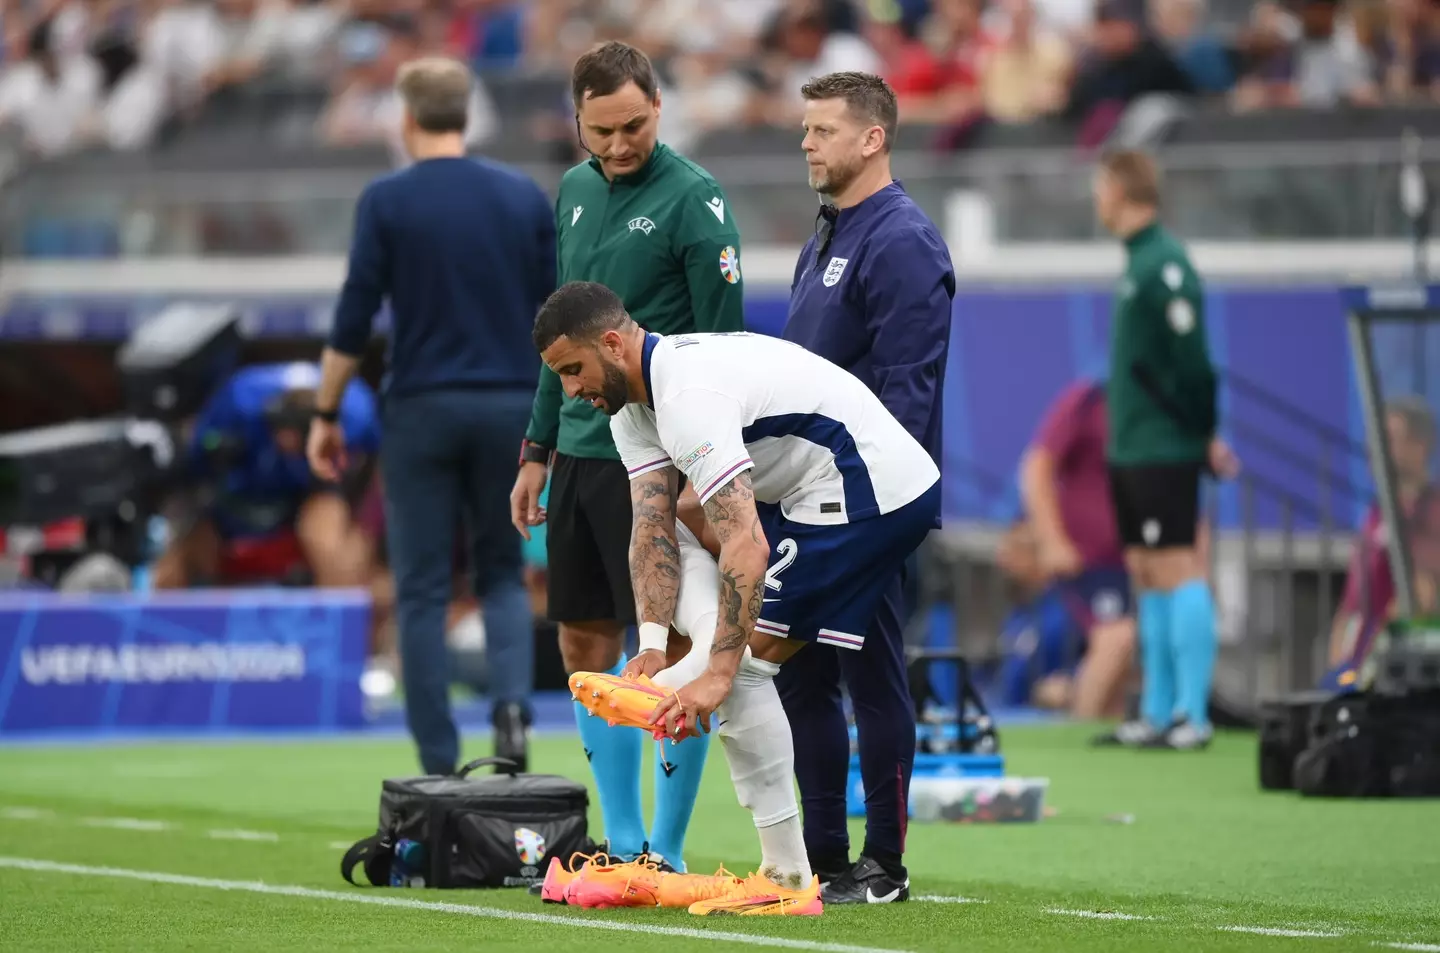 Kyle Walker forced to change his boots after slipping on the turf. Image: Getty 